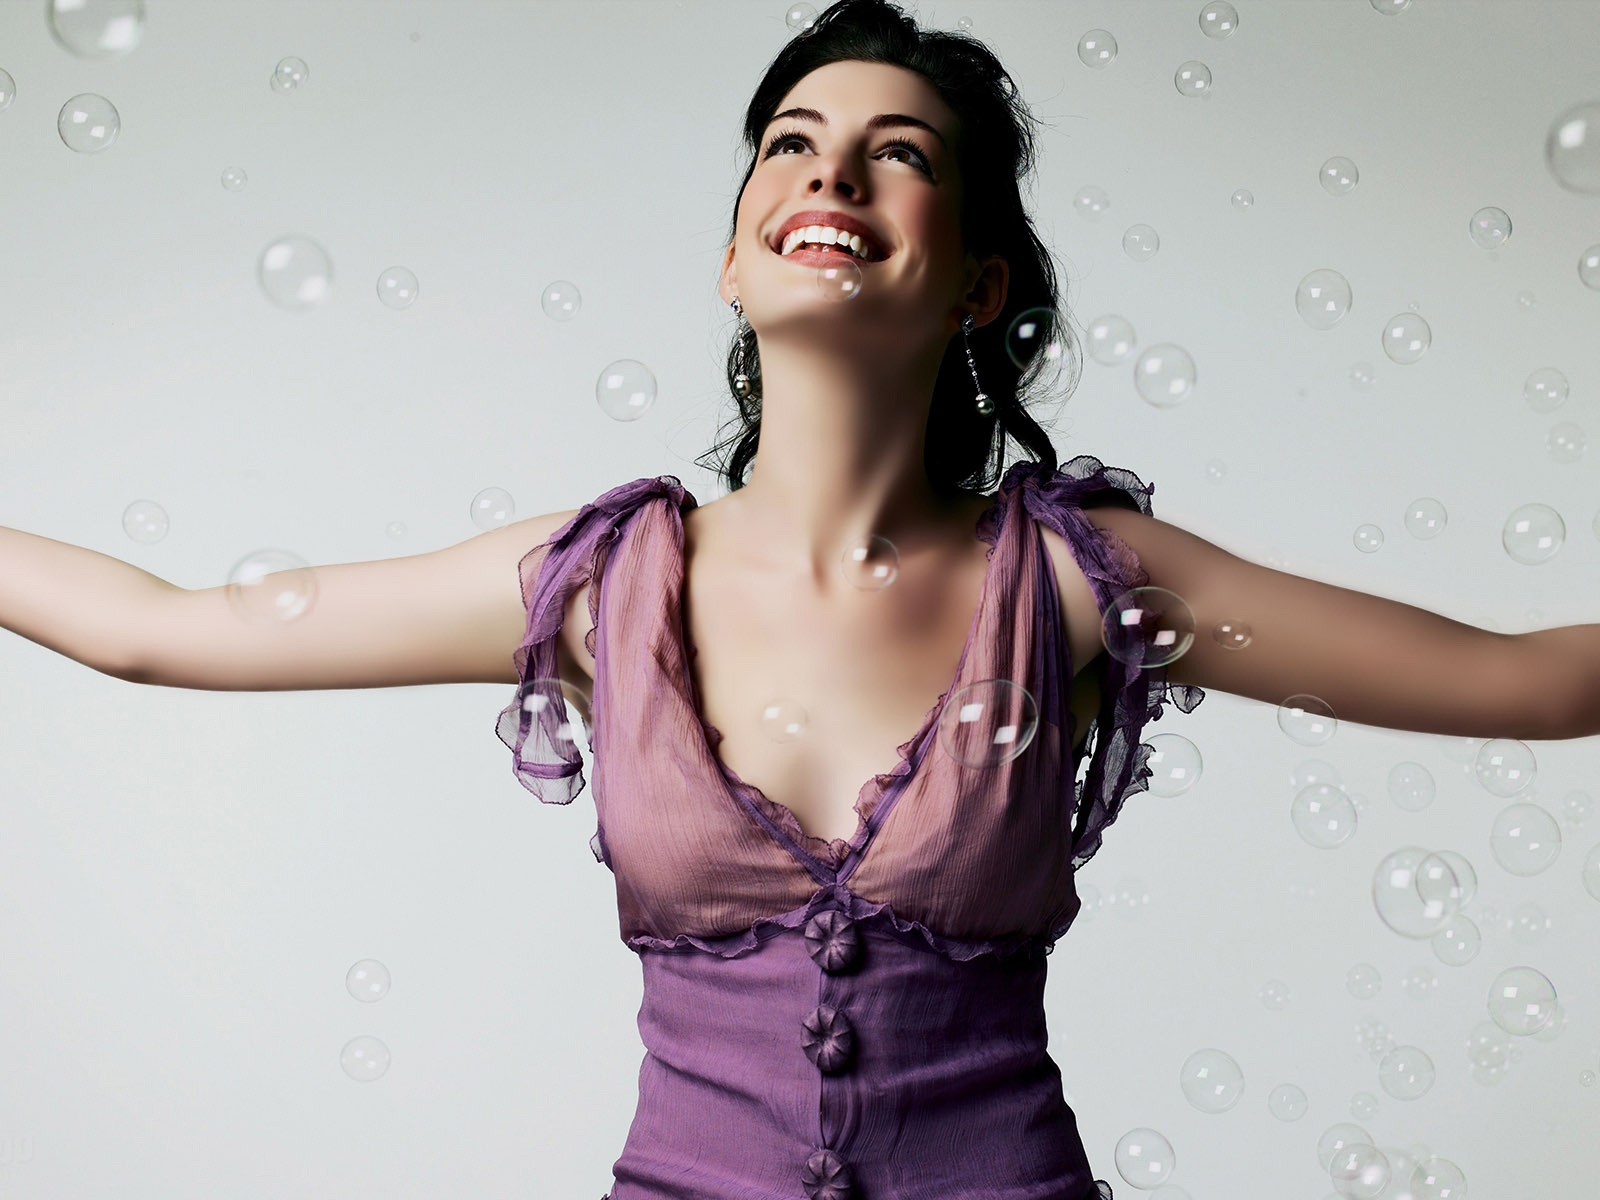 Anne Hathaway Bubbles for 1600 x 1200 resolution